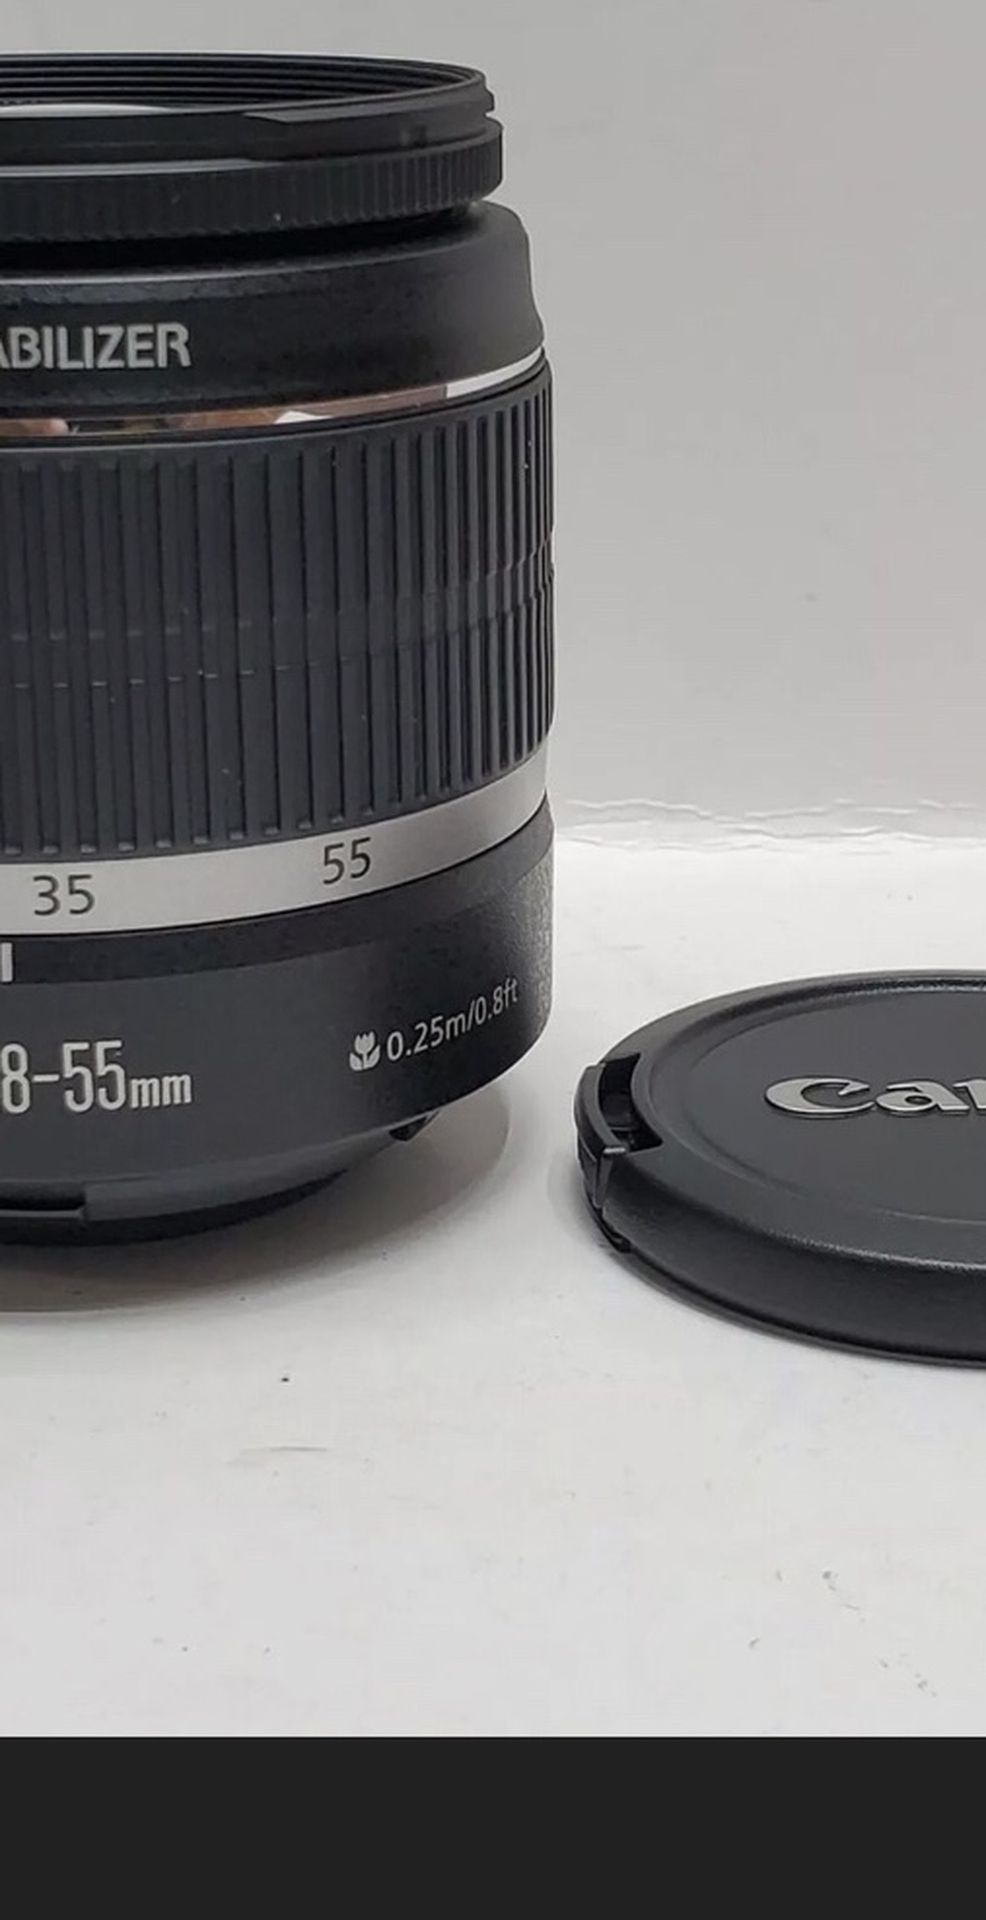 Canon EF-S 18-55mm 3.5-5.6 Lens